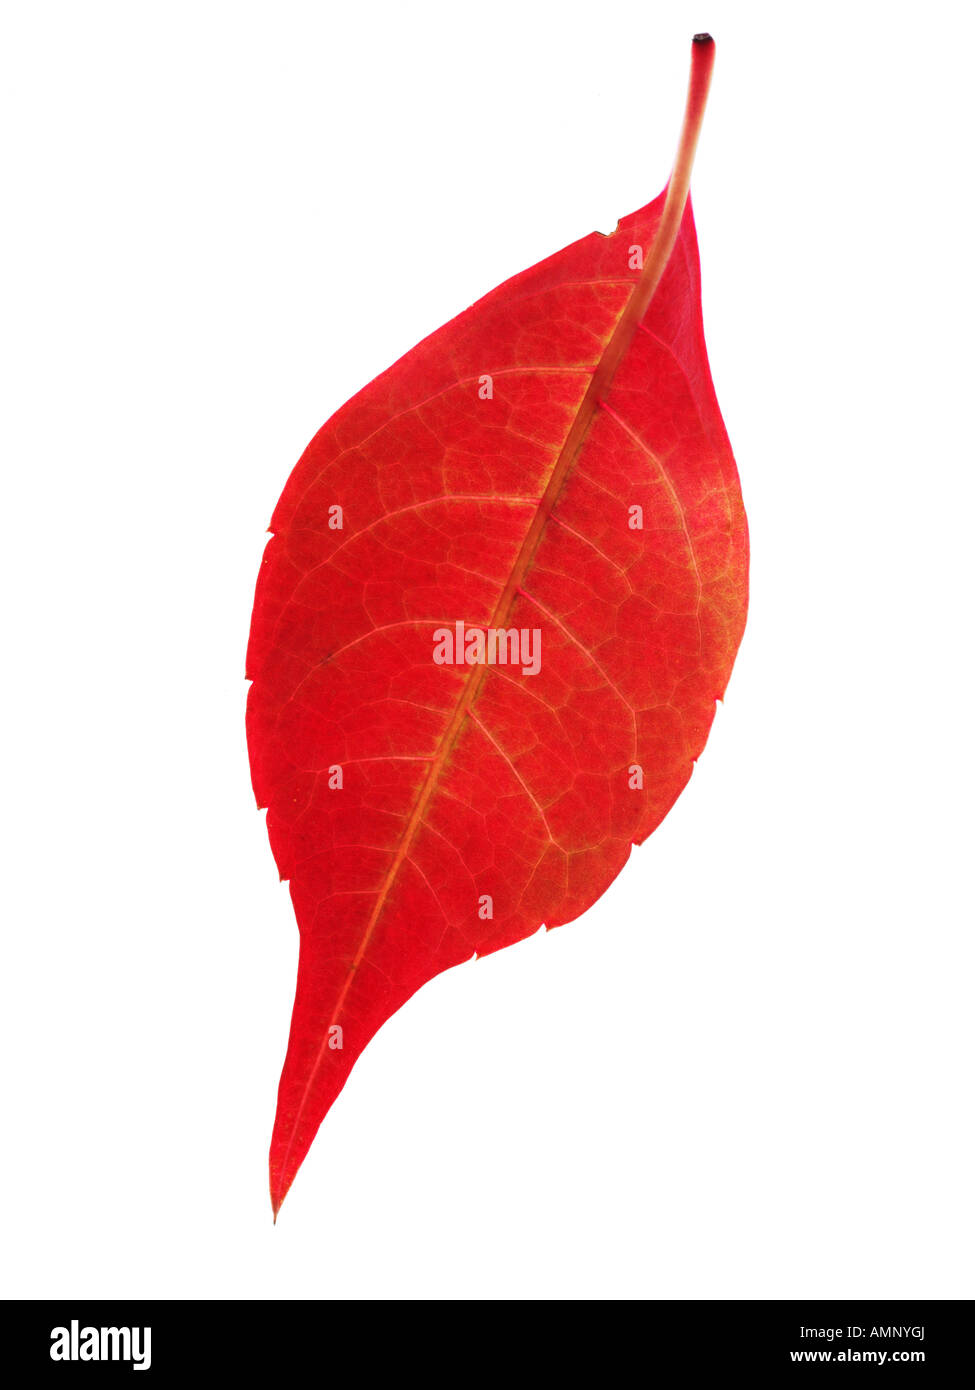 Autumn leaf. Single fall leaf against white. Natural colors and textures. Stock Photo